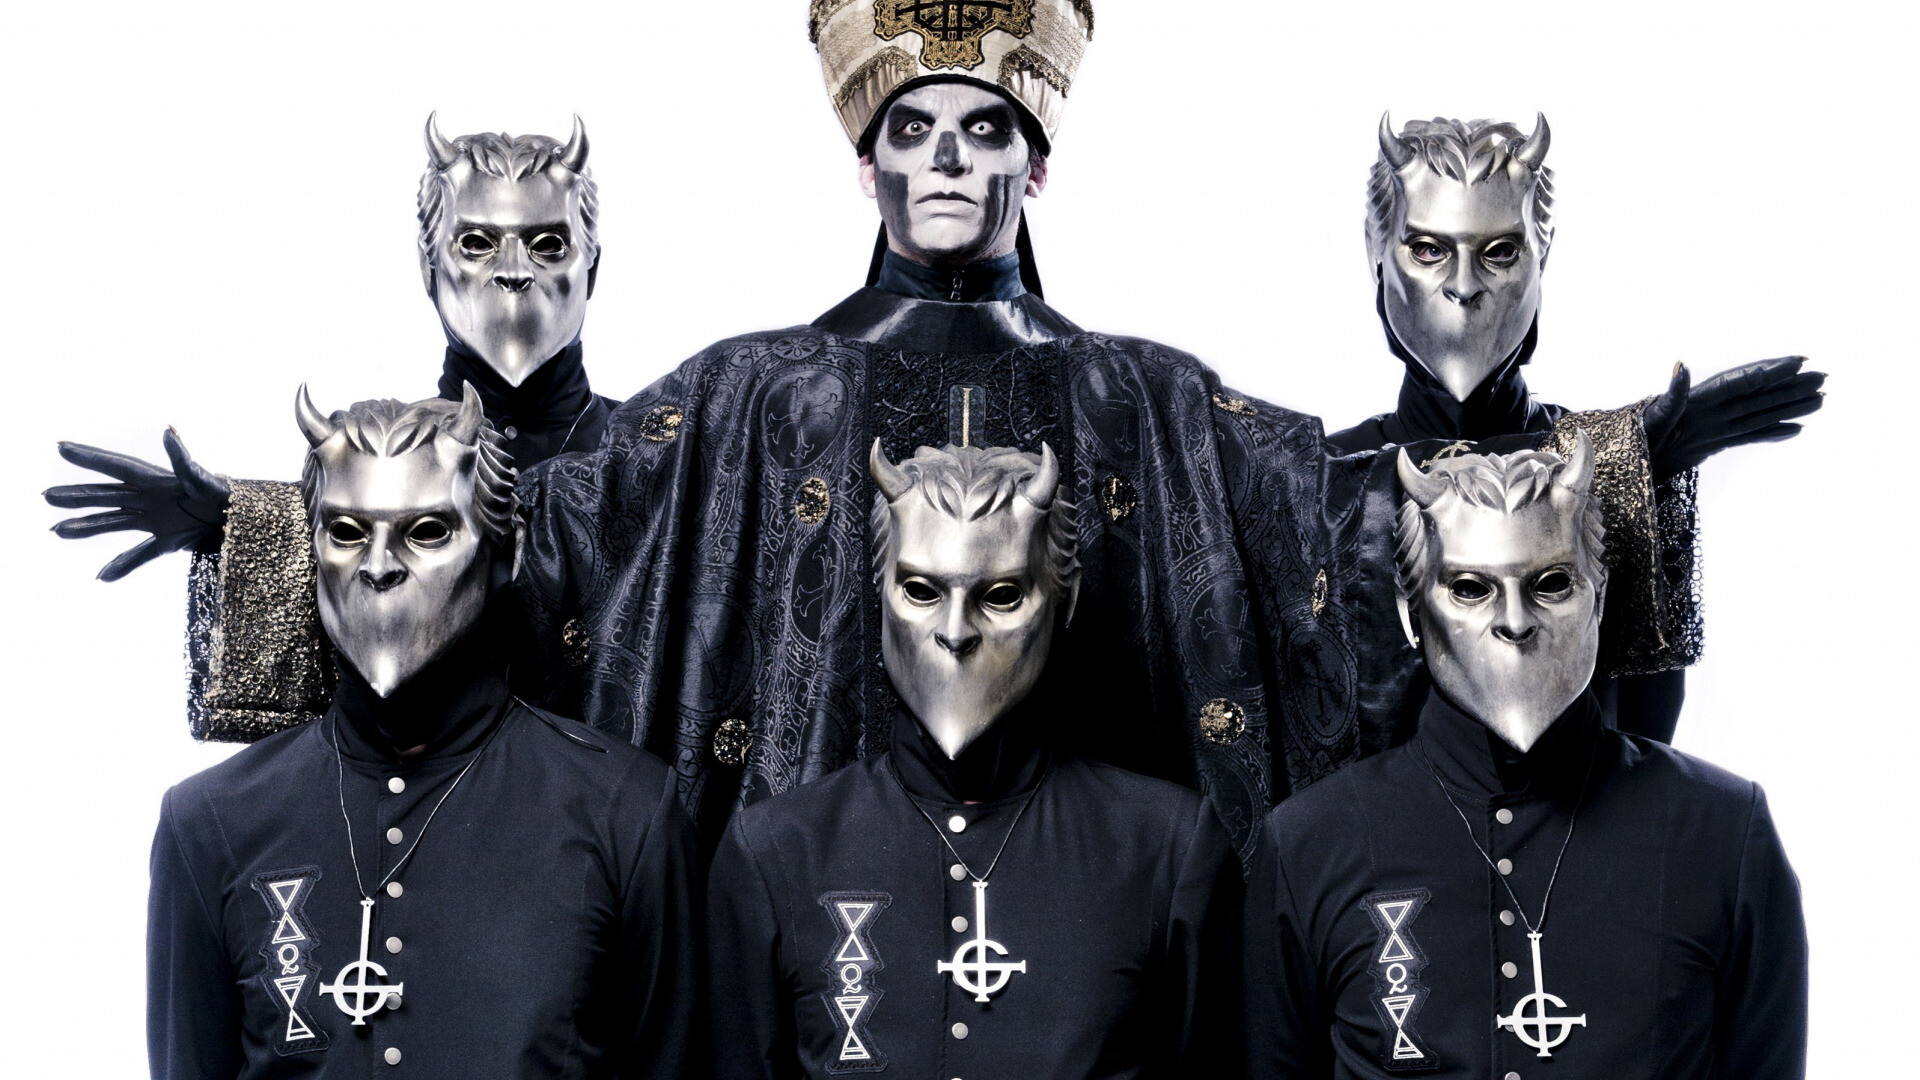 Ghost (Band): "From the Pinnacle to the Pit" was released on July 17, 2015. 1920x1080 Full HD Wallpaper.